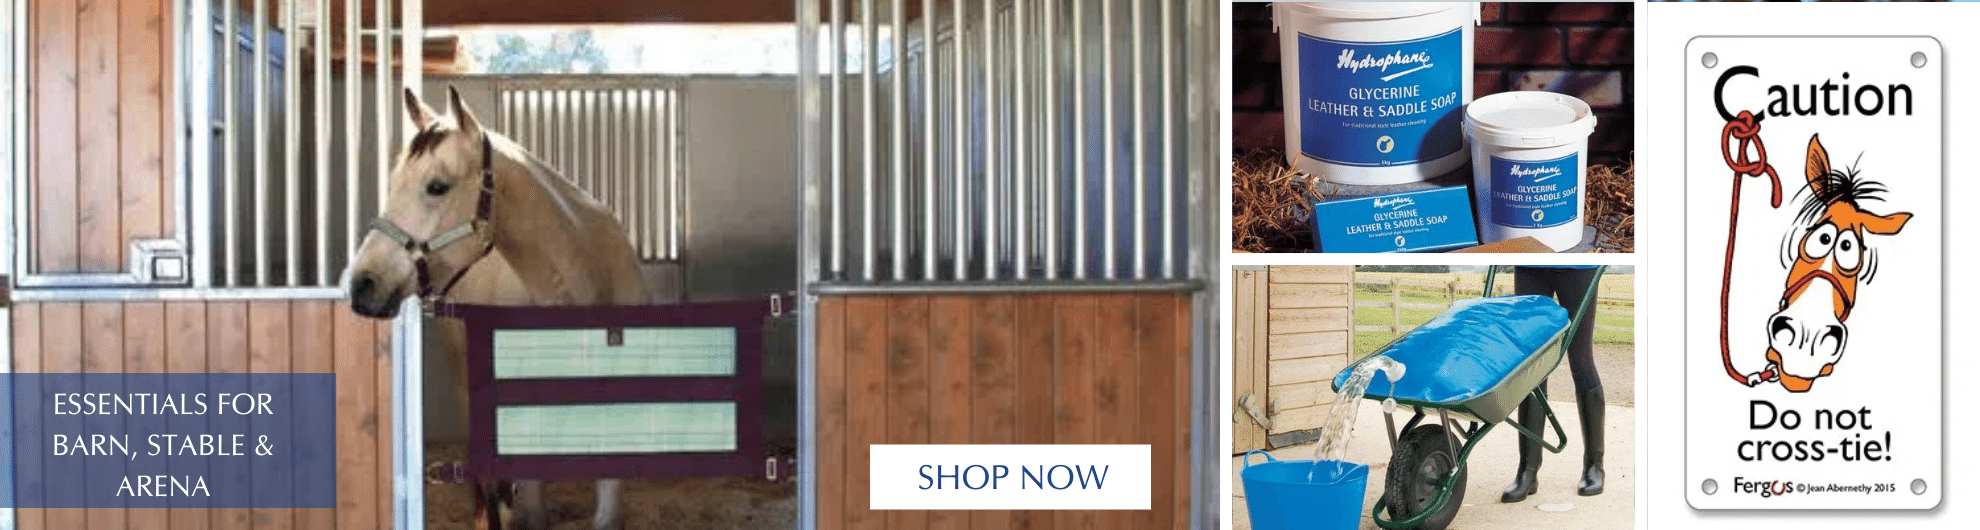 Essentials for Barn, Stable & Arena